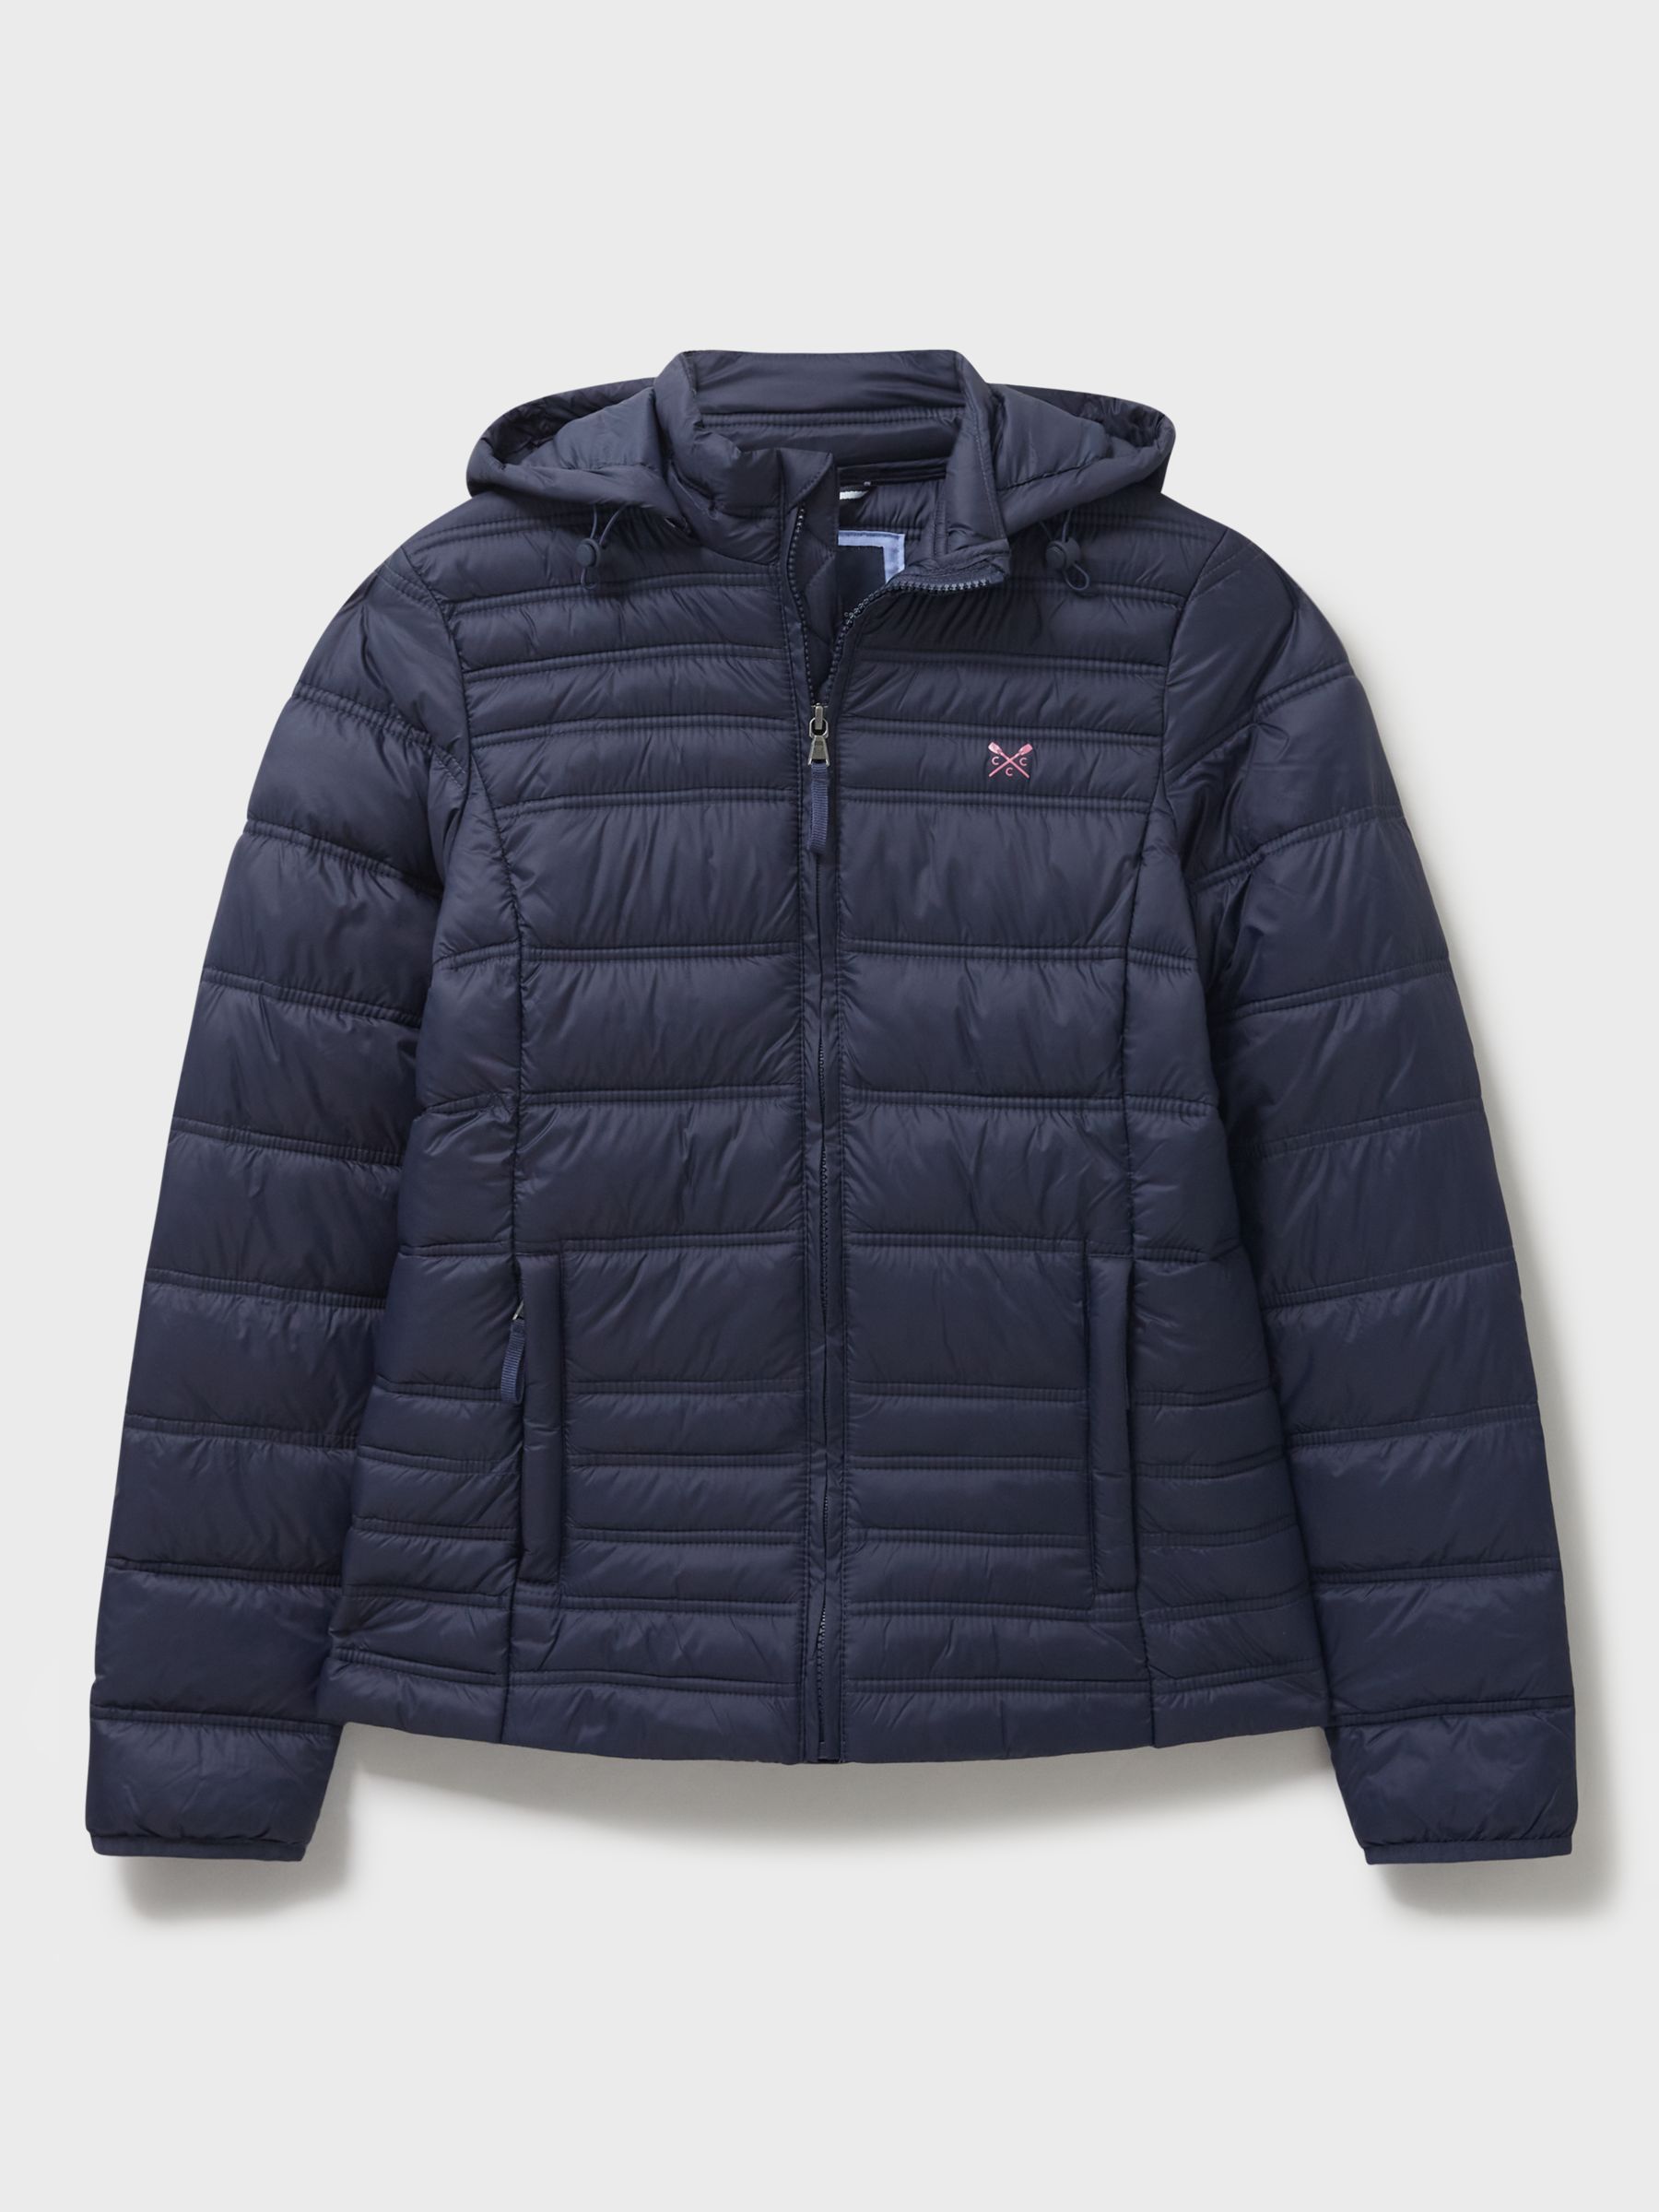 Buy Crew Clothing Quilted Lightweight Hooded Jacket Online at johnlewis.com